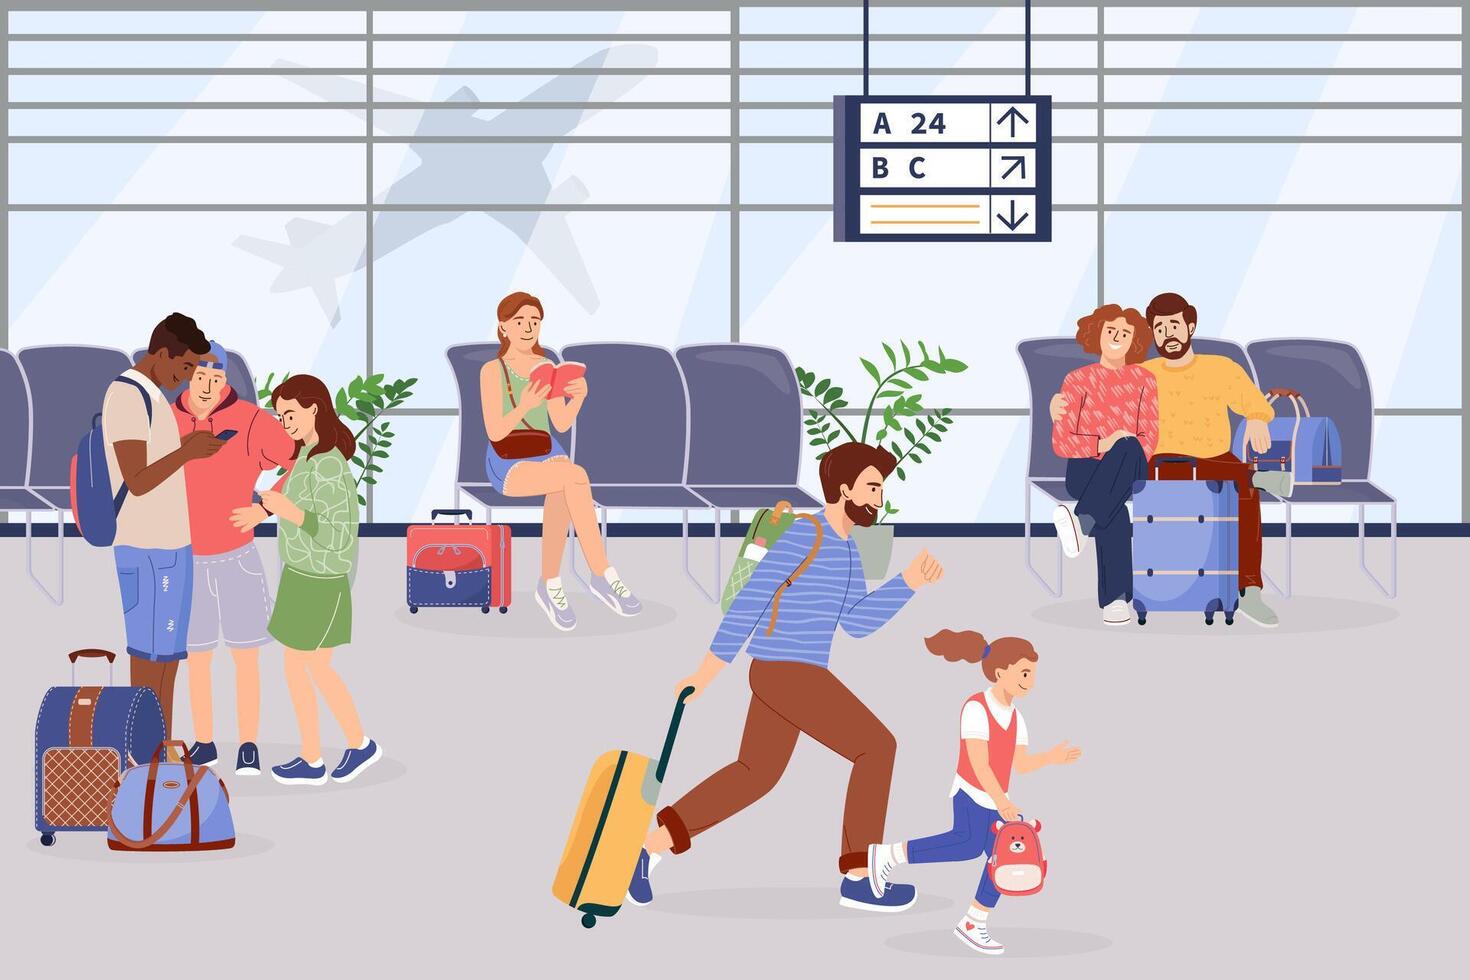 Passengers at waiting room in international airport. Tourists with luggage and phones in lounge area. Running man with suitcase and child hurry trying to get his flight. Flat vector illustration